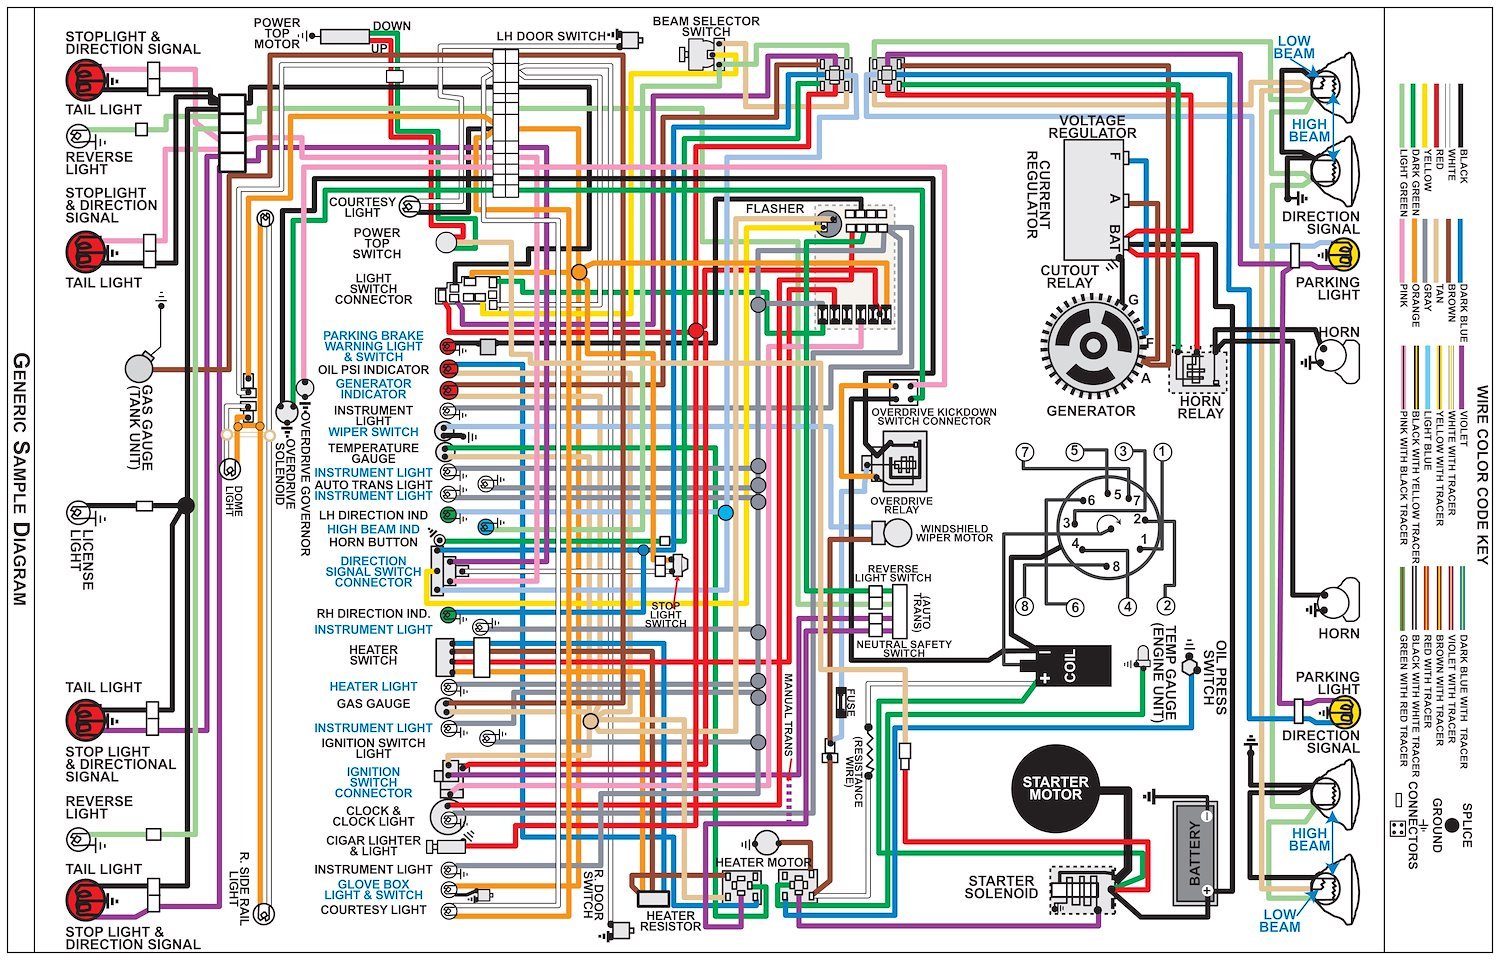 Wiring Diagram for 1971 Dodge Charger with Rallye Dash, 11 in x 17 in., Laminated